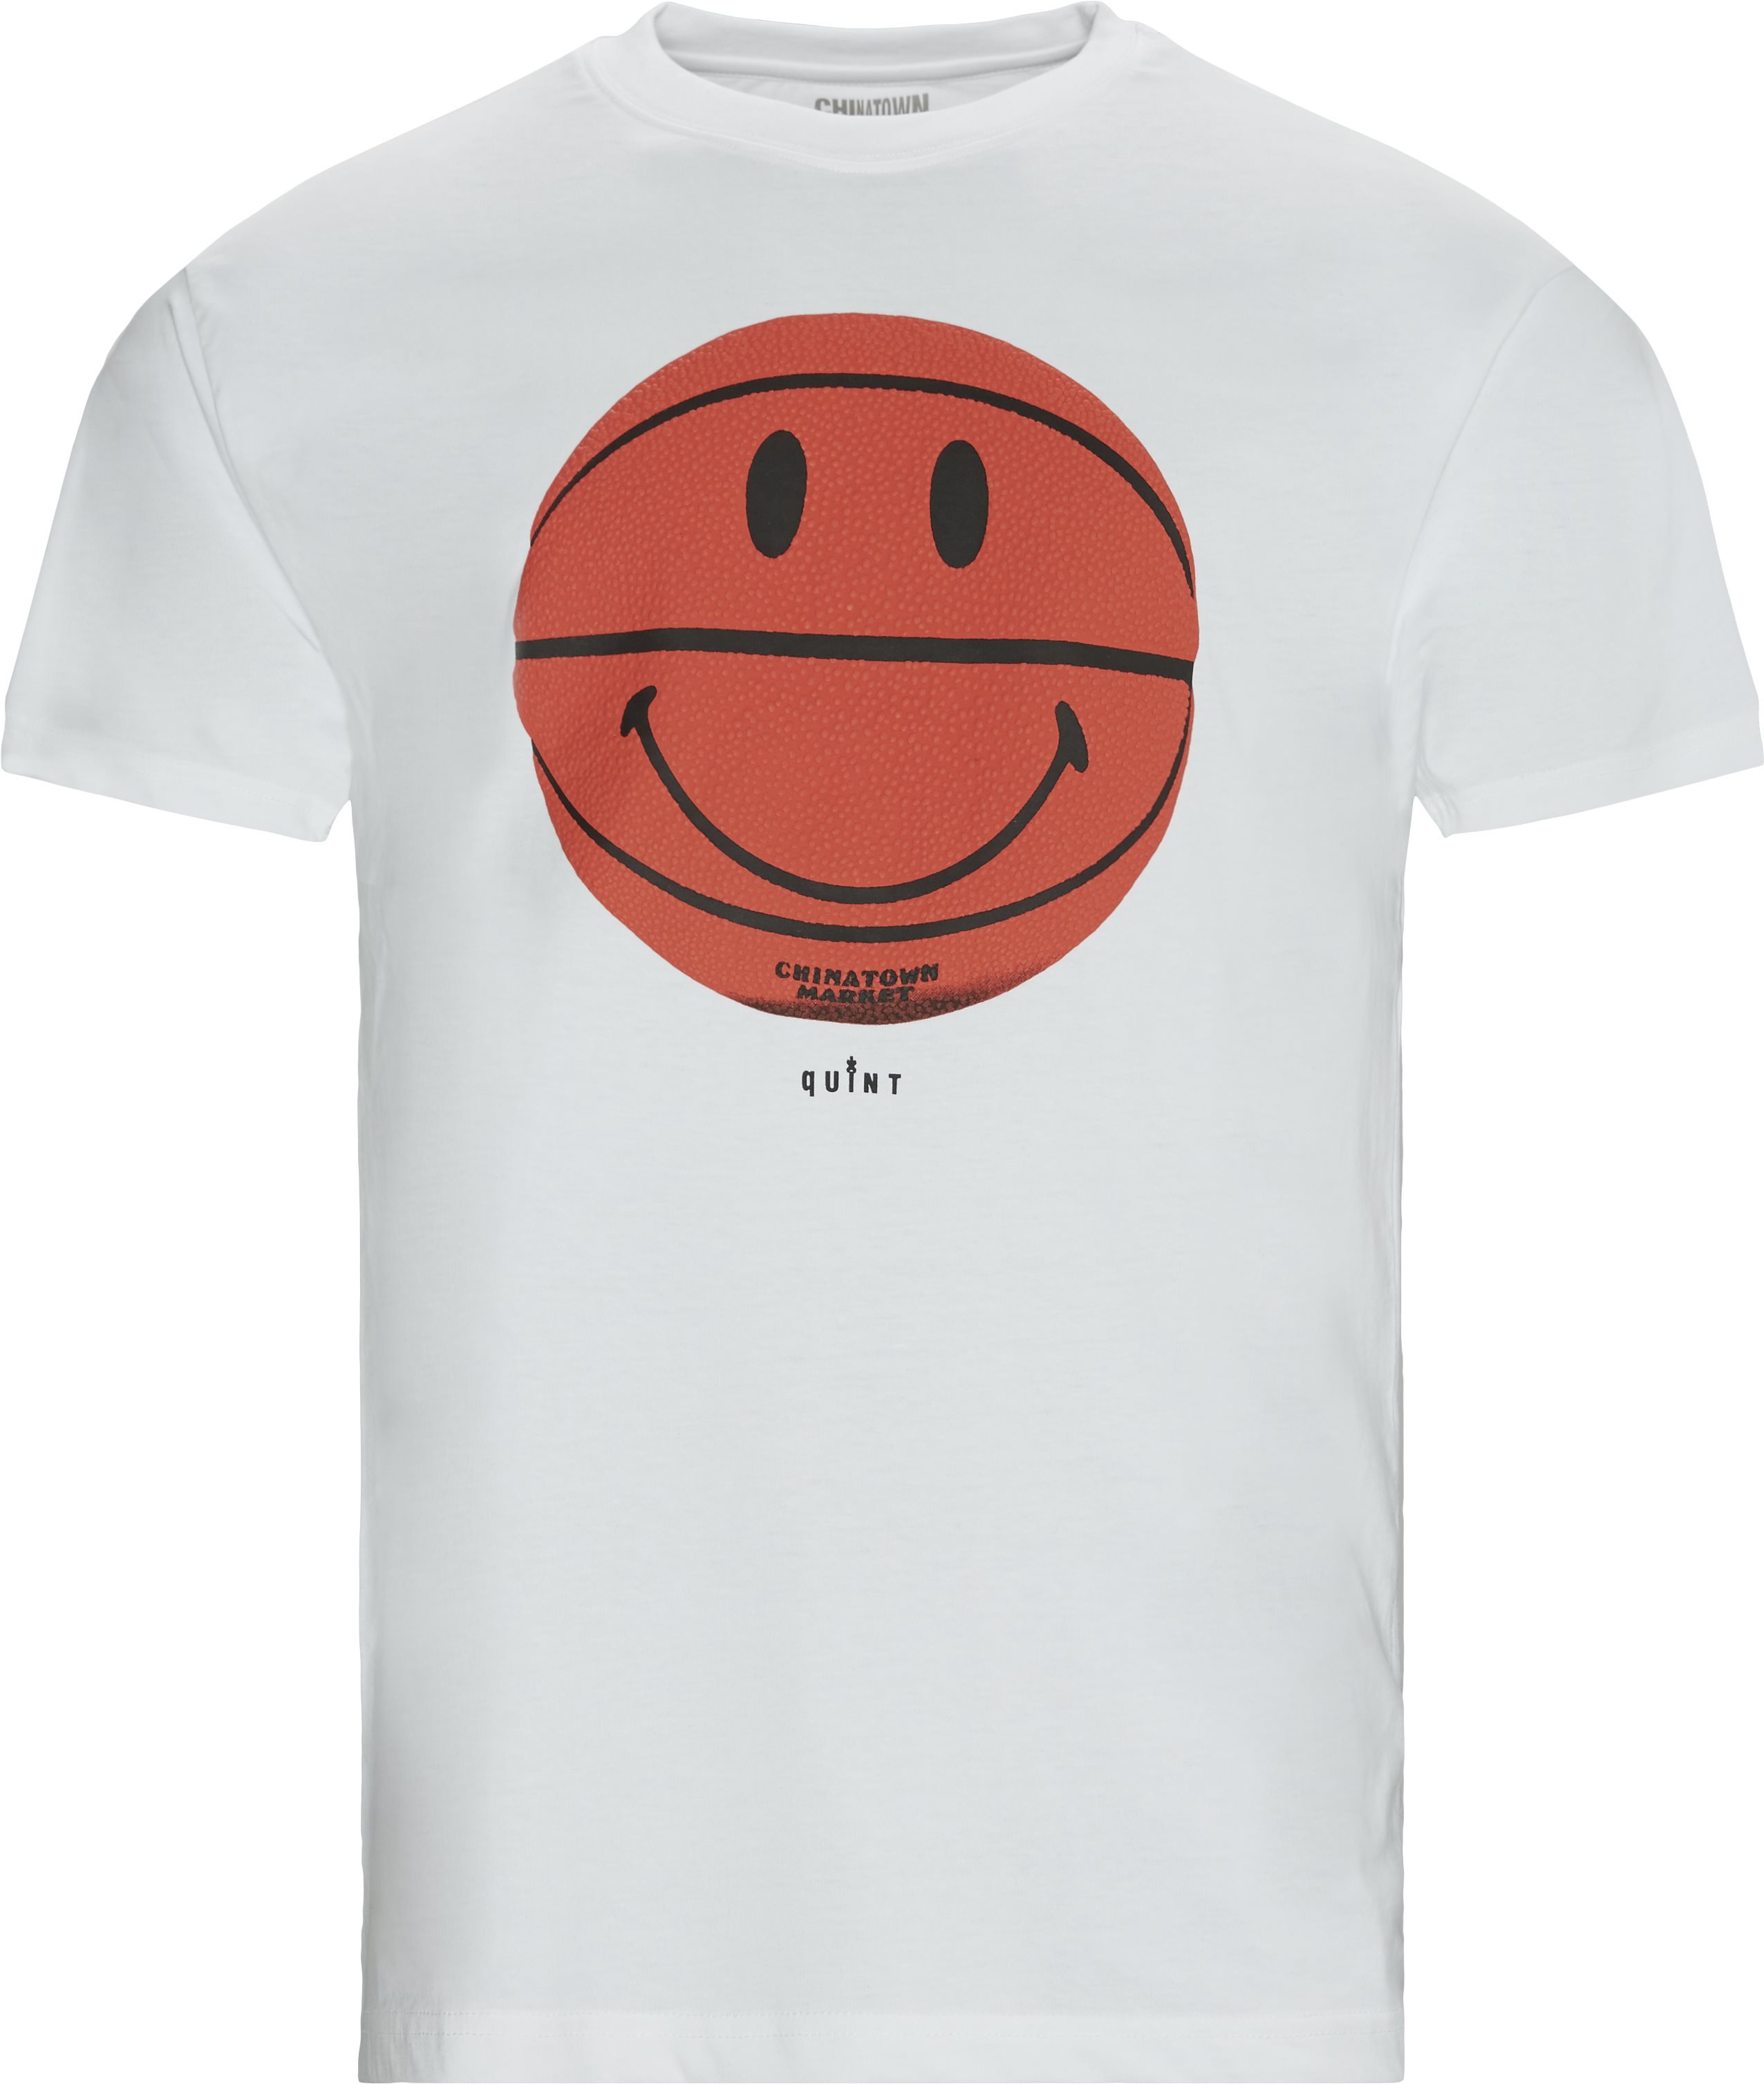 Market T-shirts SMILEY CTM X QUINT BBALL TEE Hvid